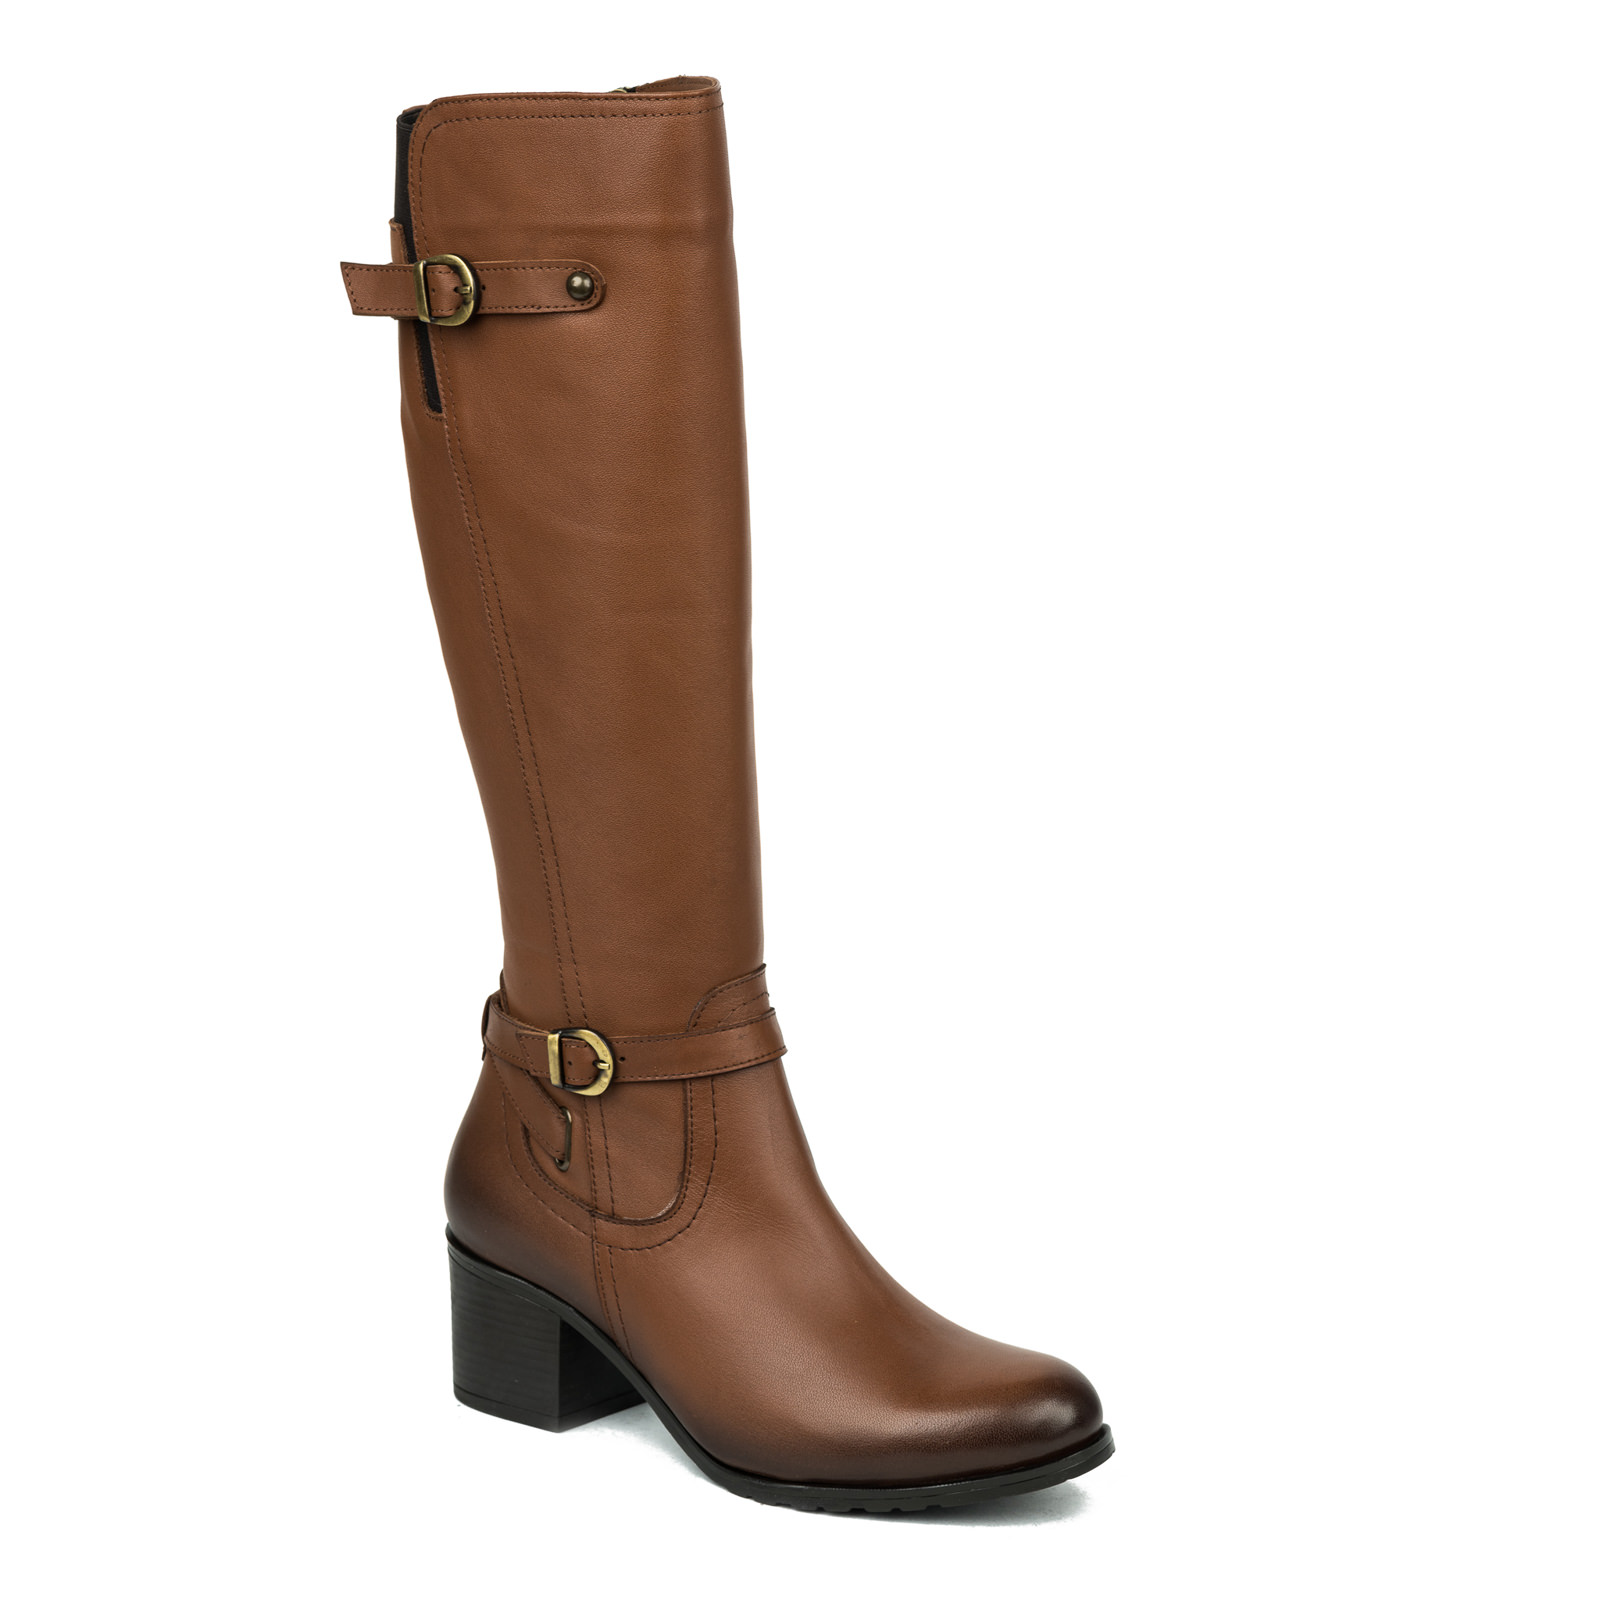 Leather boots B147 - CAMEL